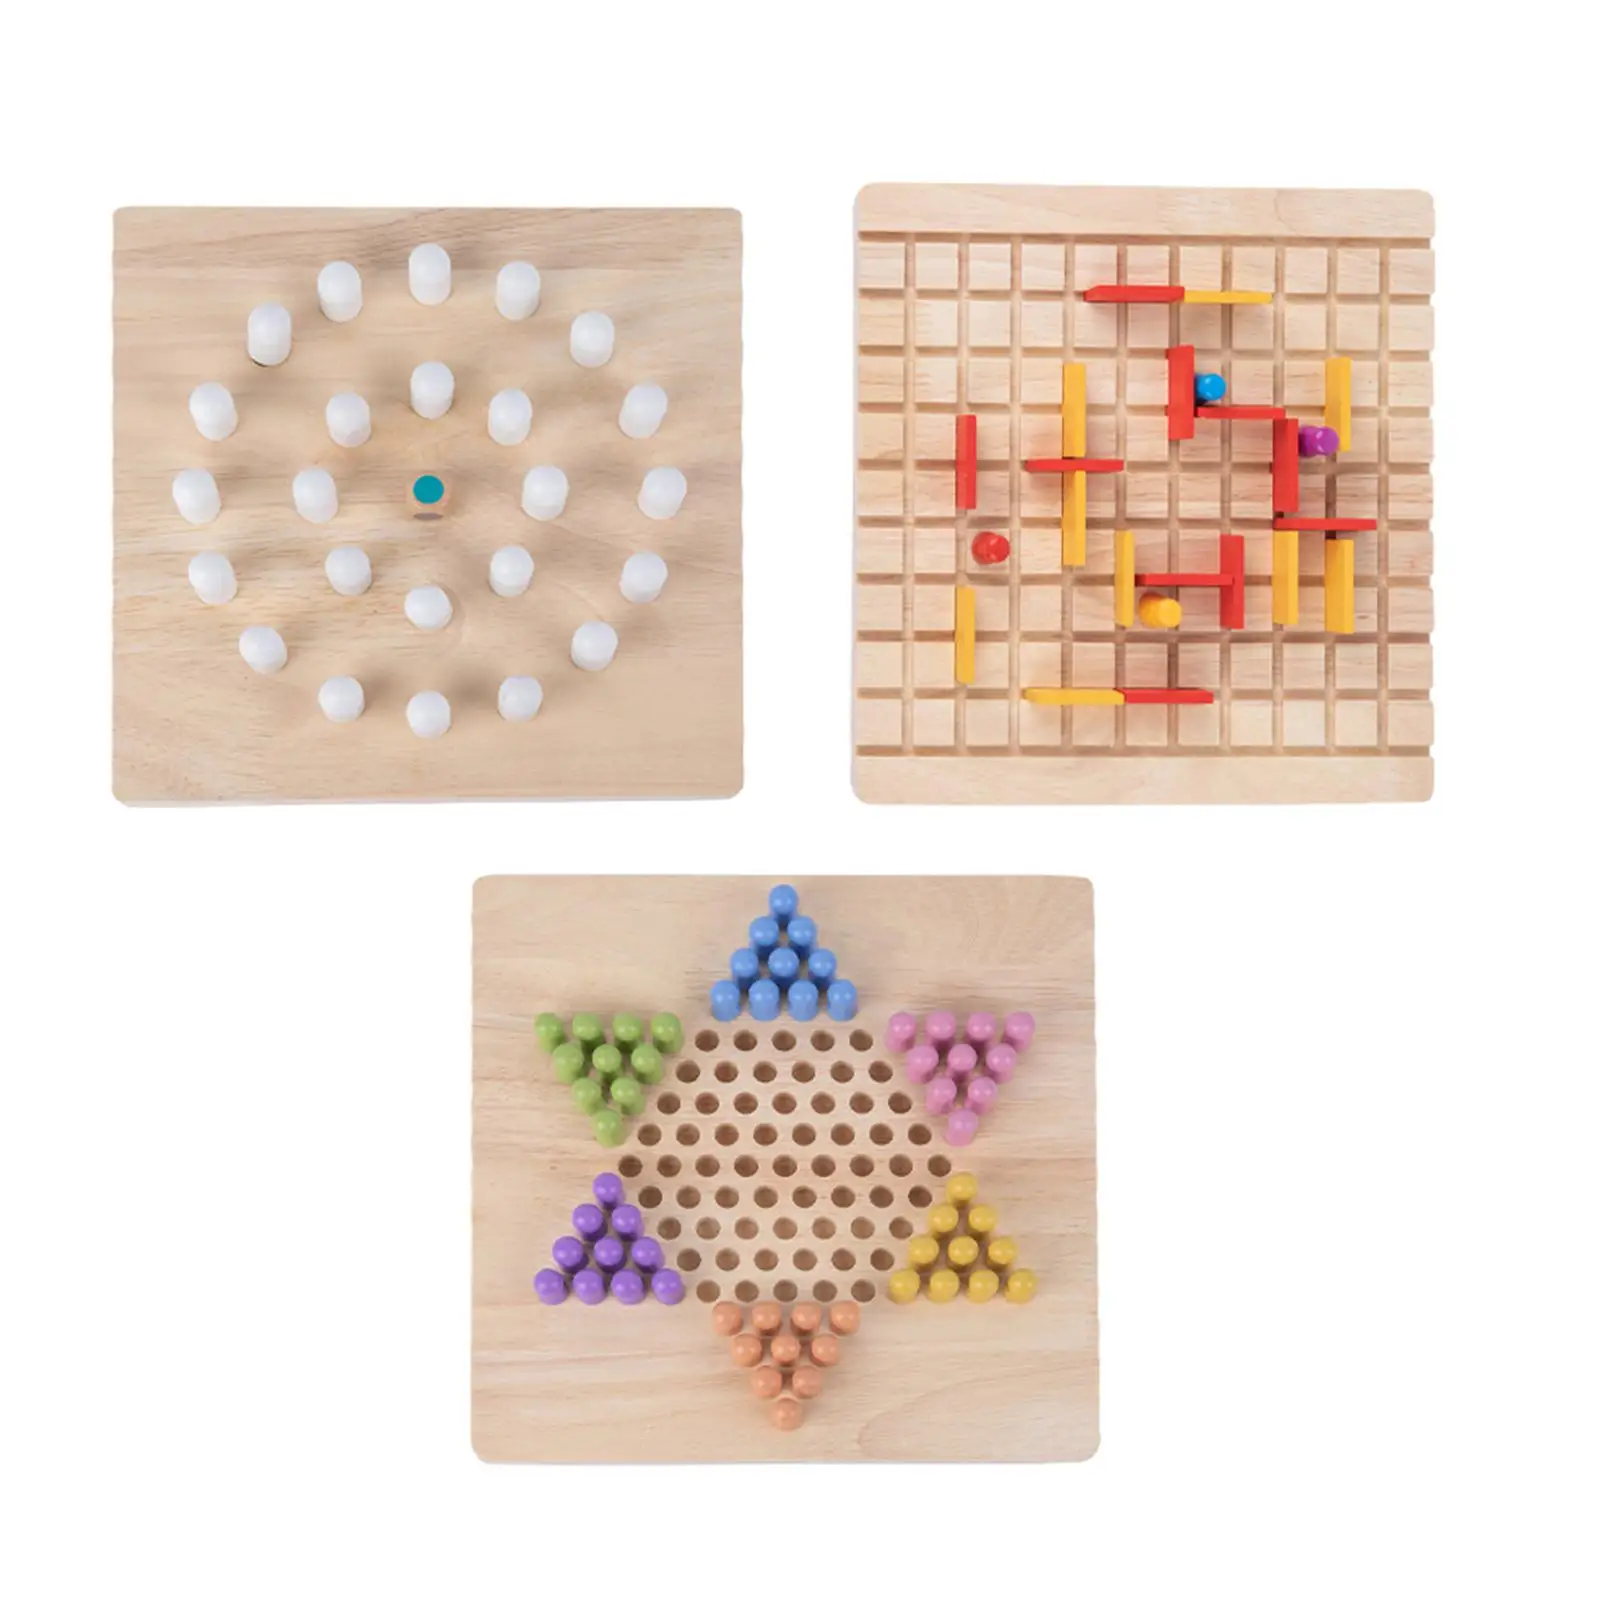 Classic Strategy Game Learning Wood Strategy Family Game for Interaction Activity Social Skills Preschool Hand Eye Coordination